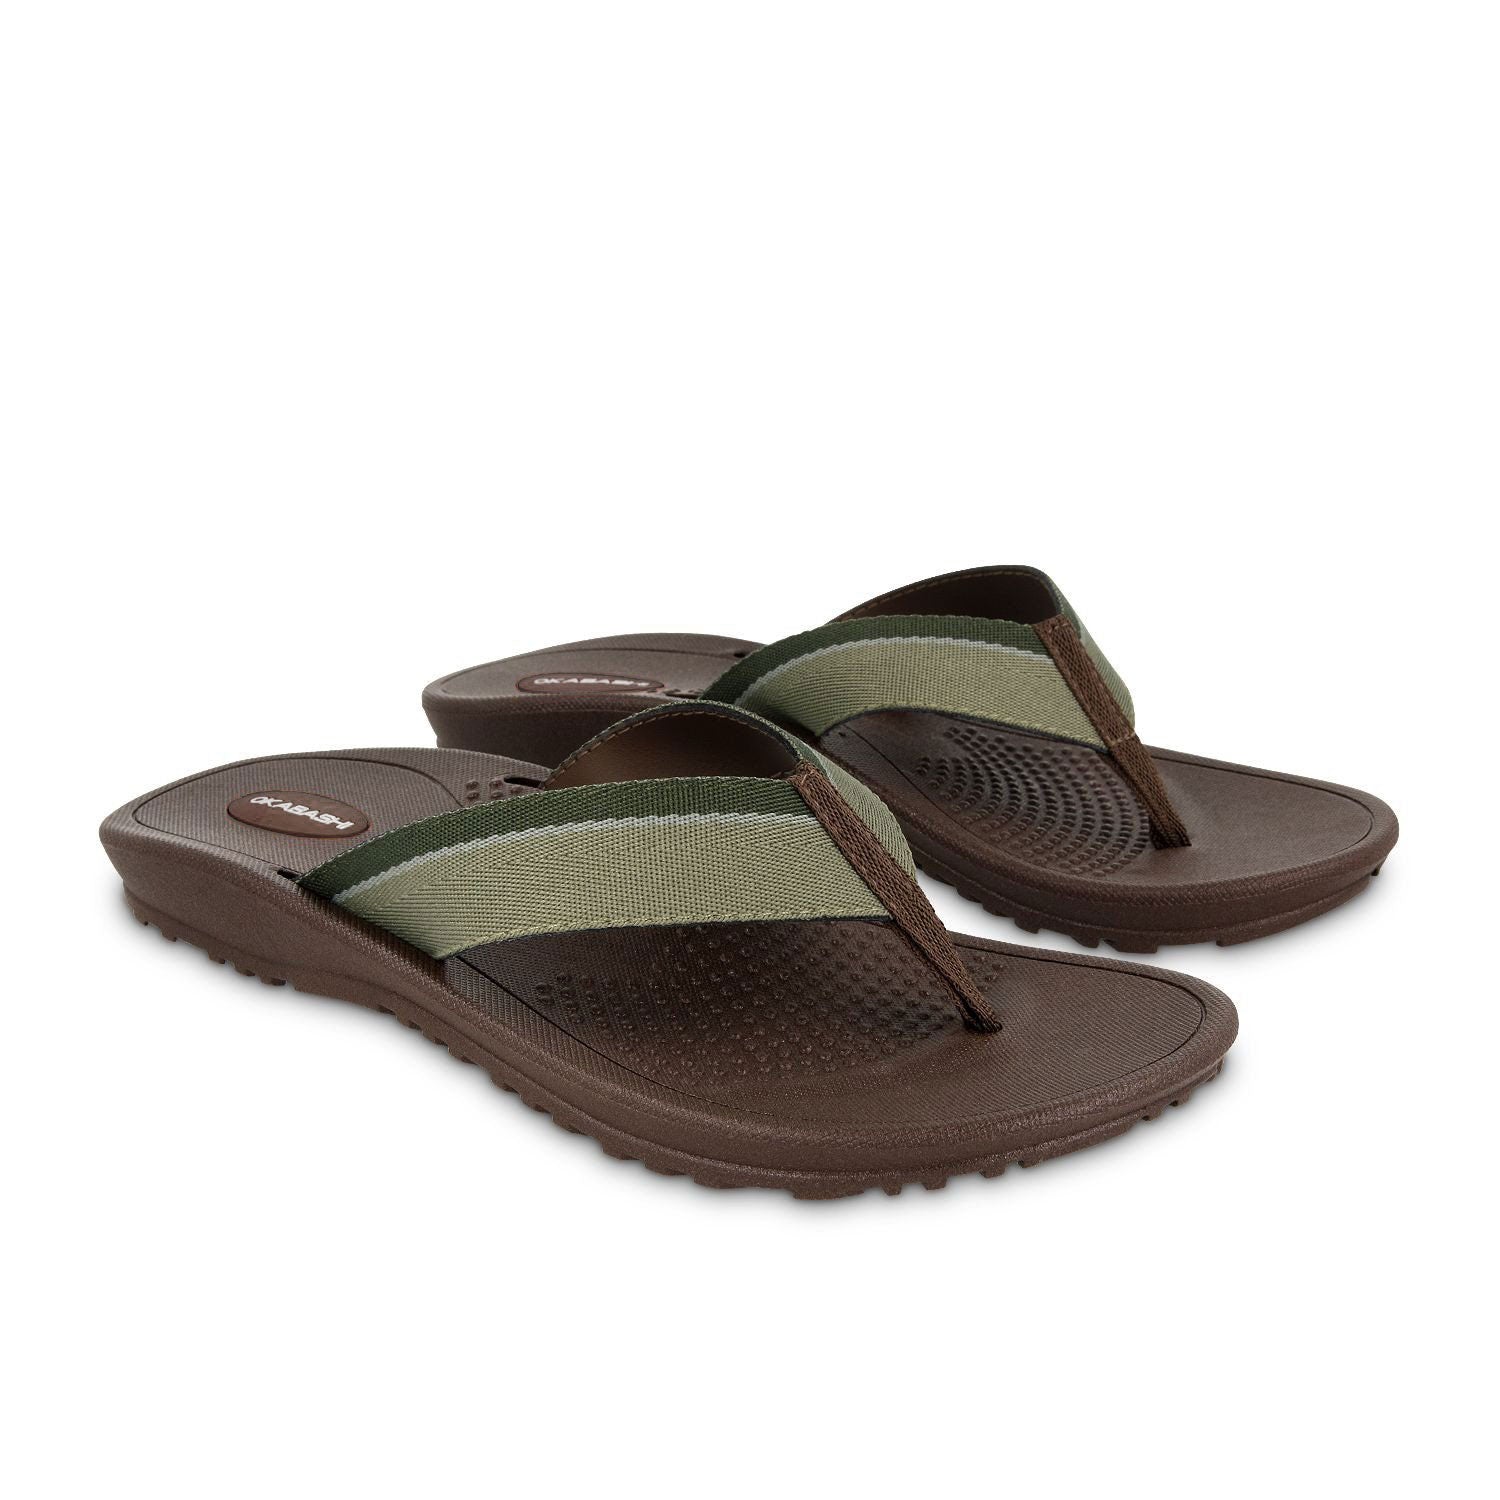 flip flop with arch support women's